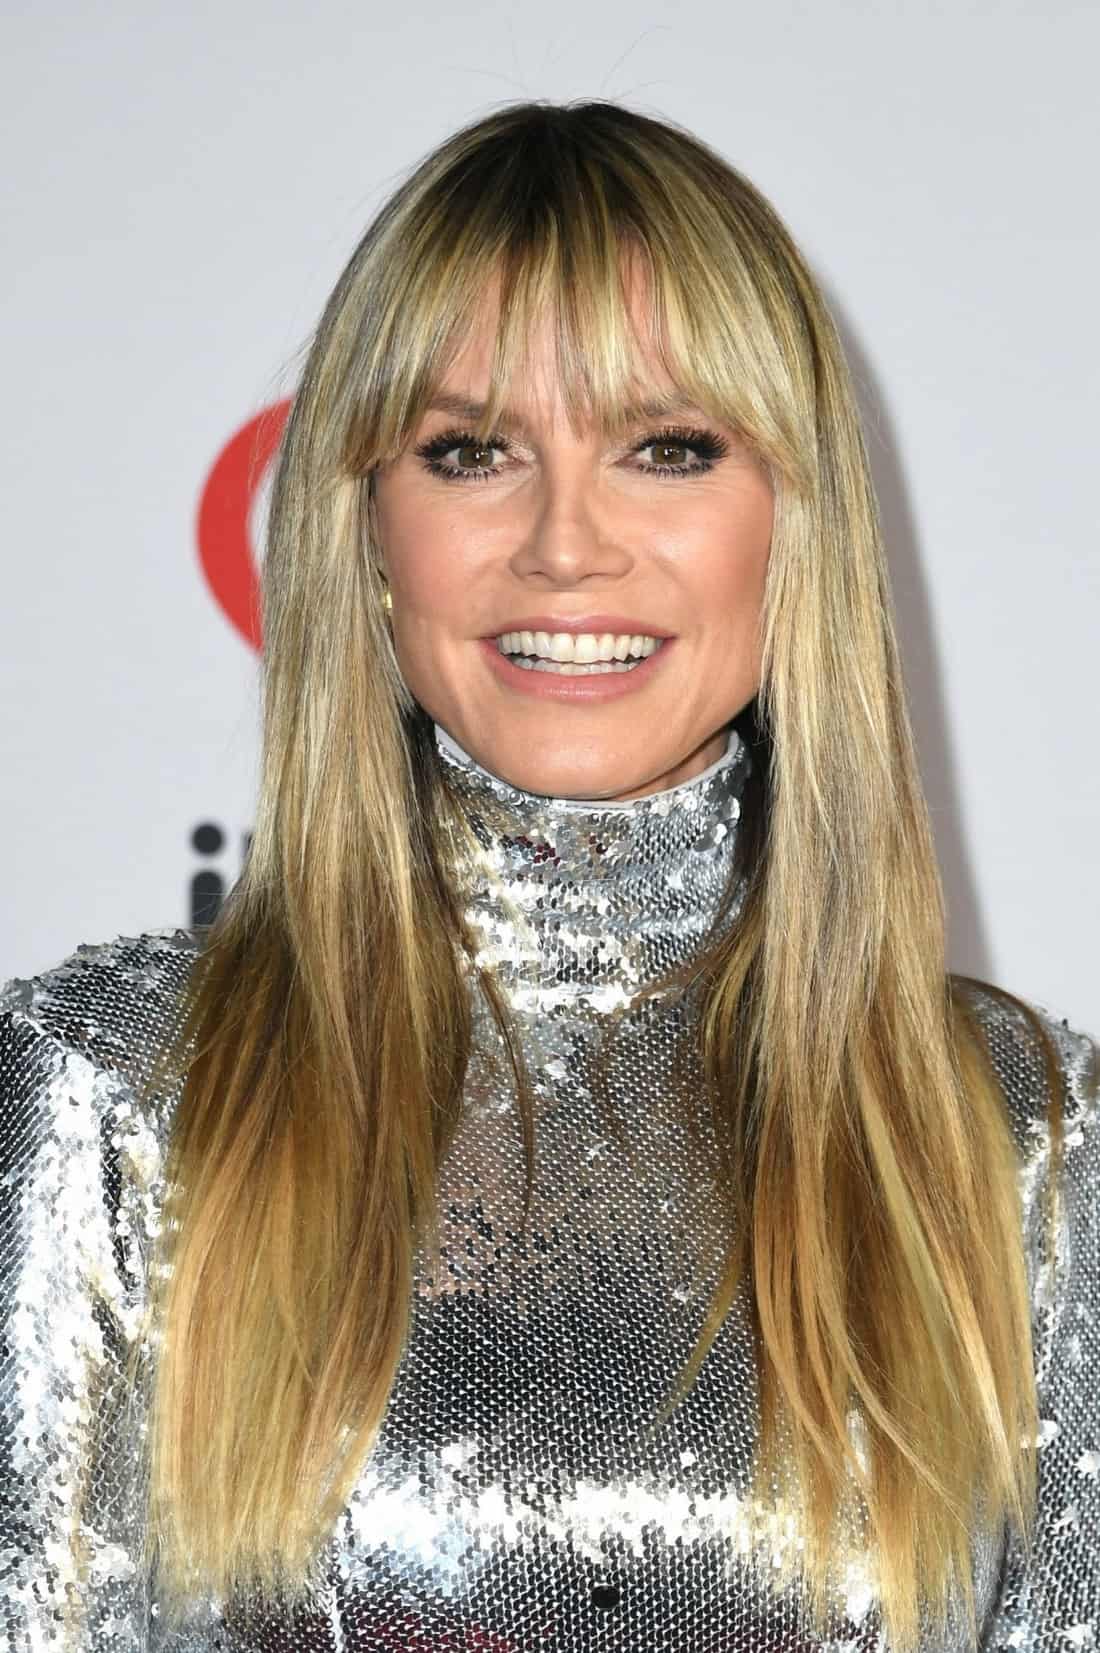 Heidi Klum Wore a Sparkly Silver Dress at the 2022 iHeartRadio Music Awards